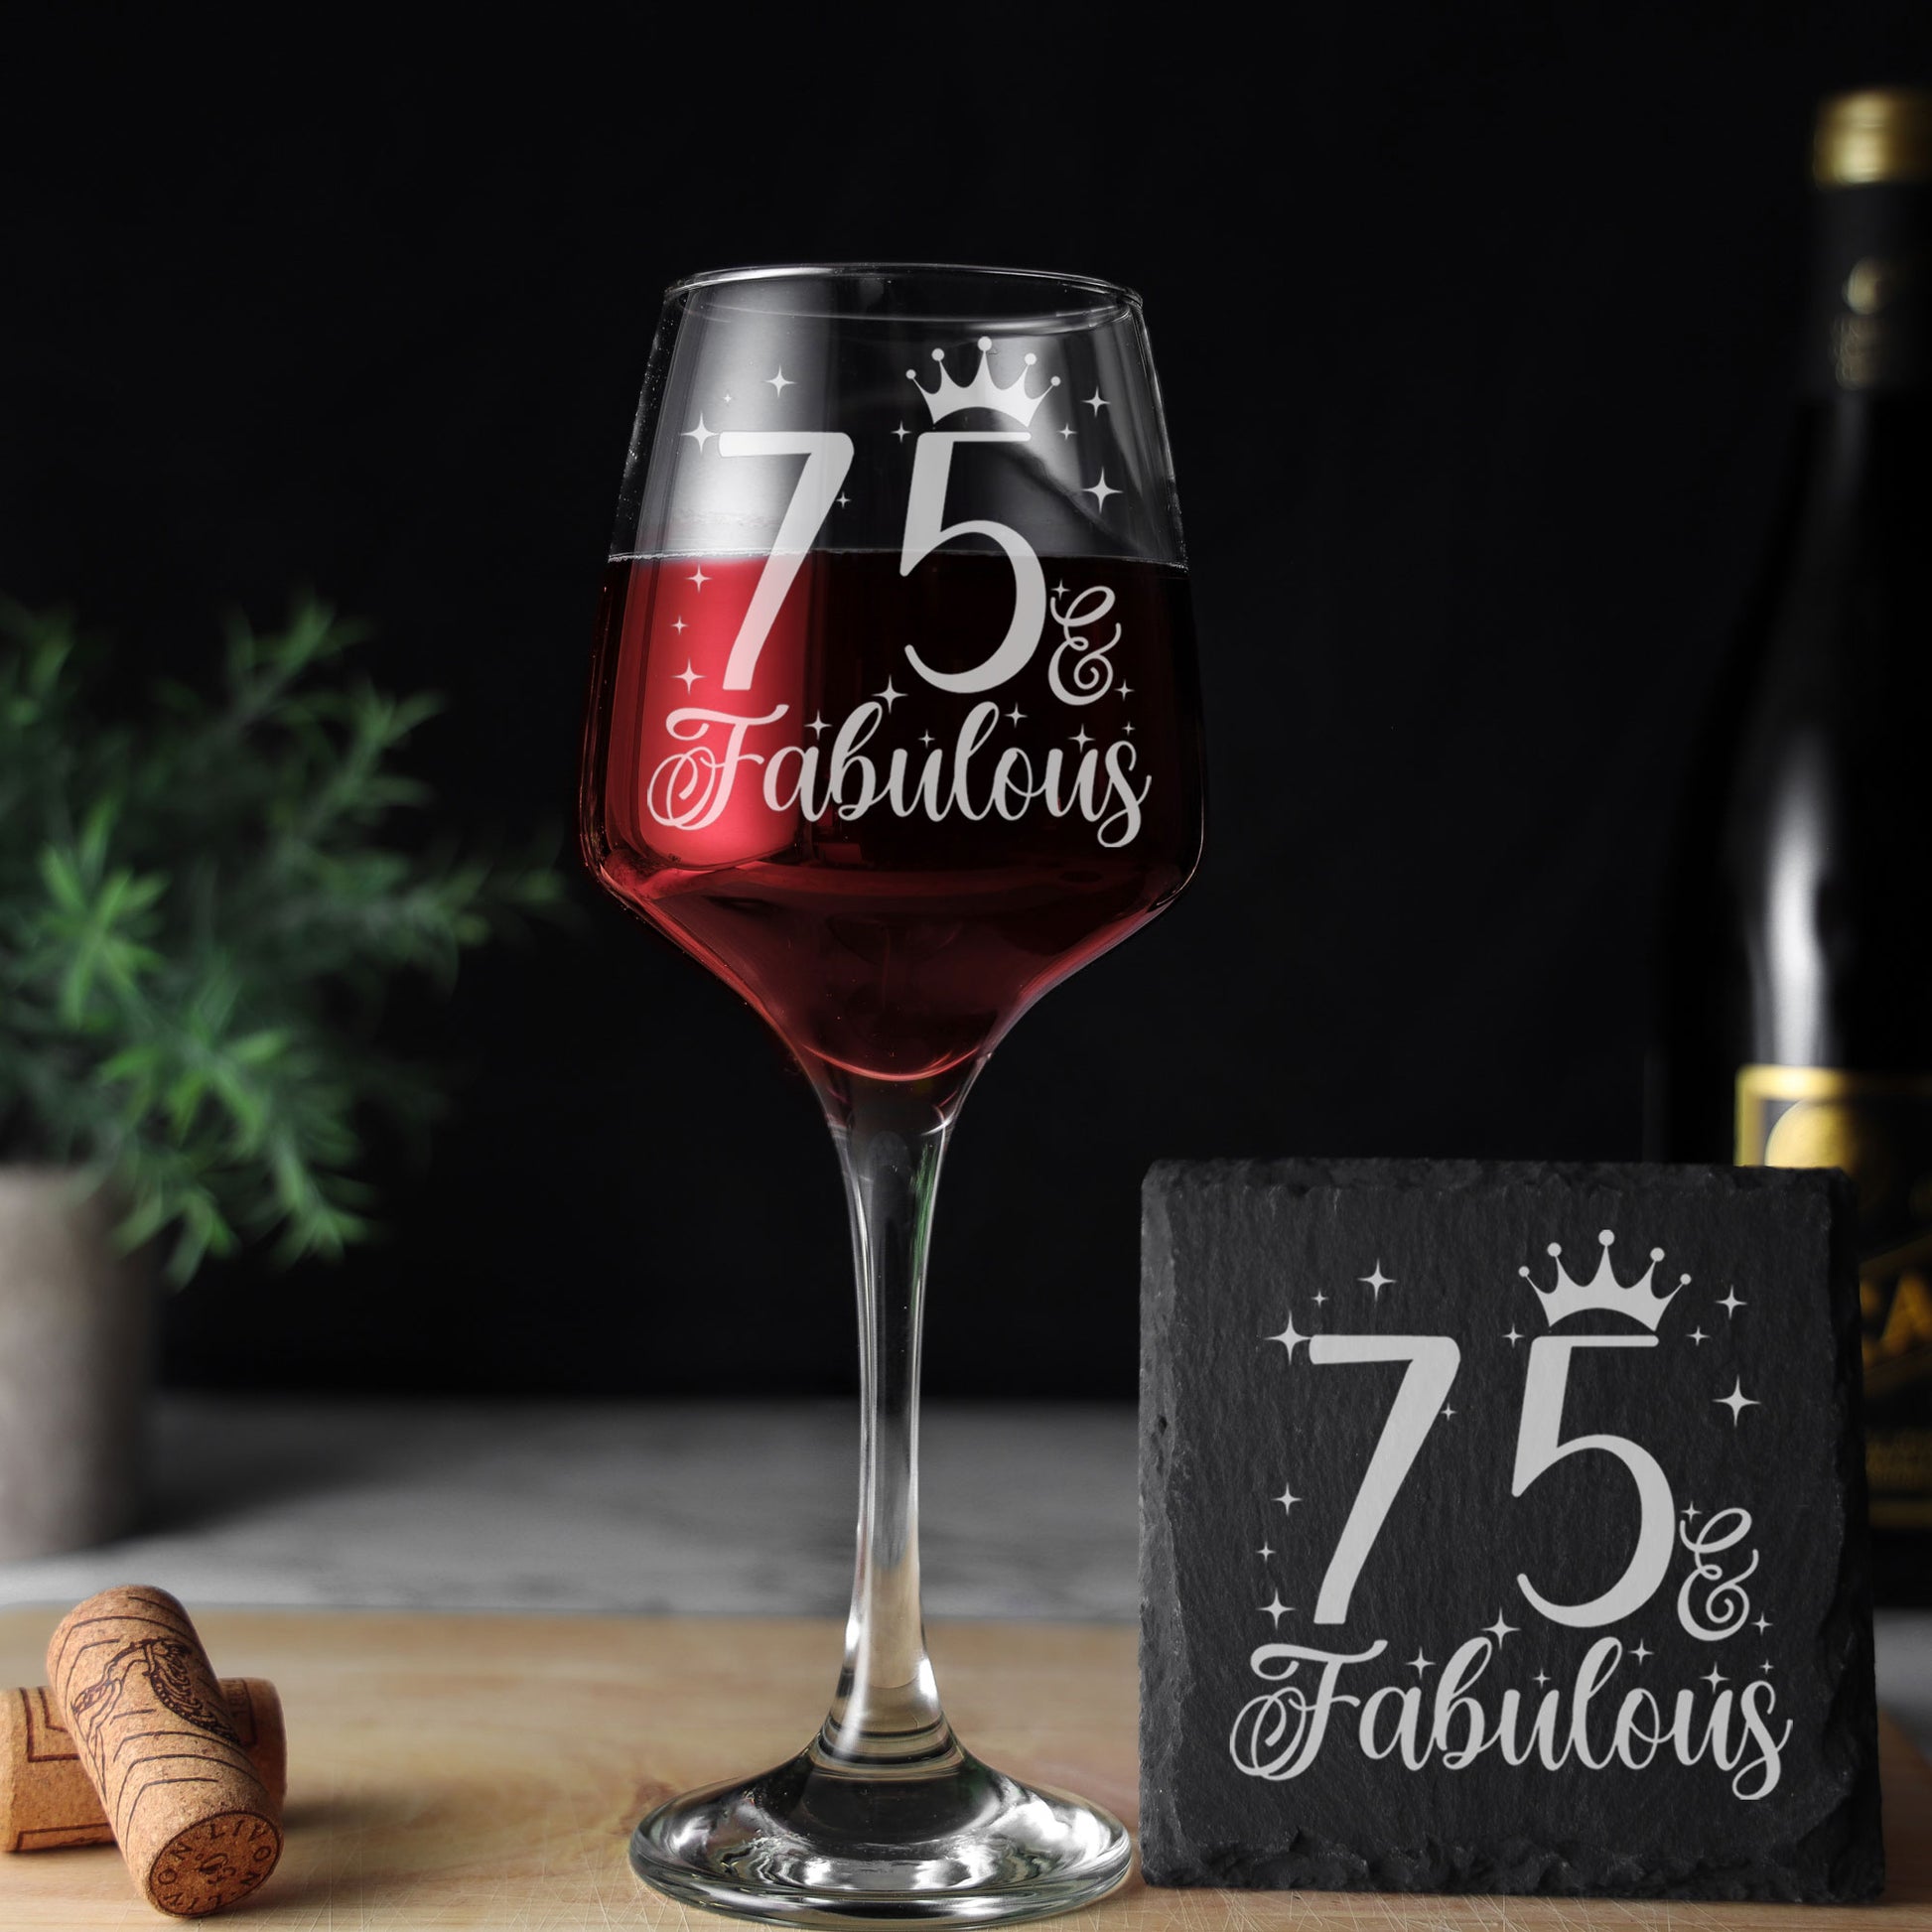 75 & Fabulous 75th Birthday Gift Engraved Wine Glass and/or Coaster Set  - Always Looking Good - Glass & Square Coaster  